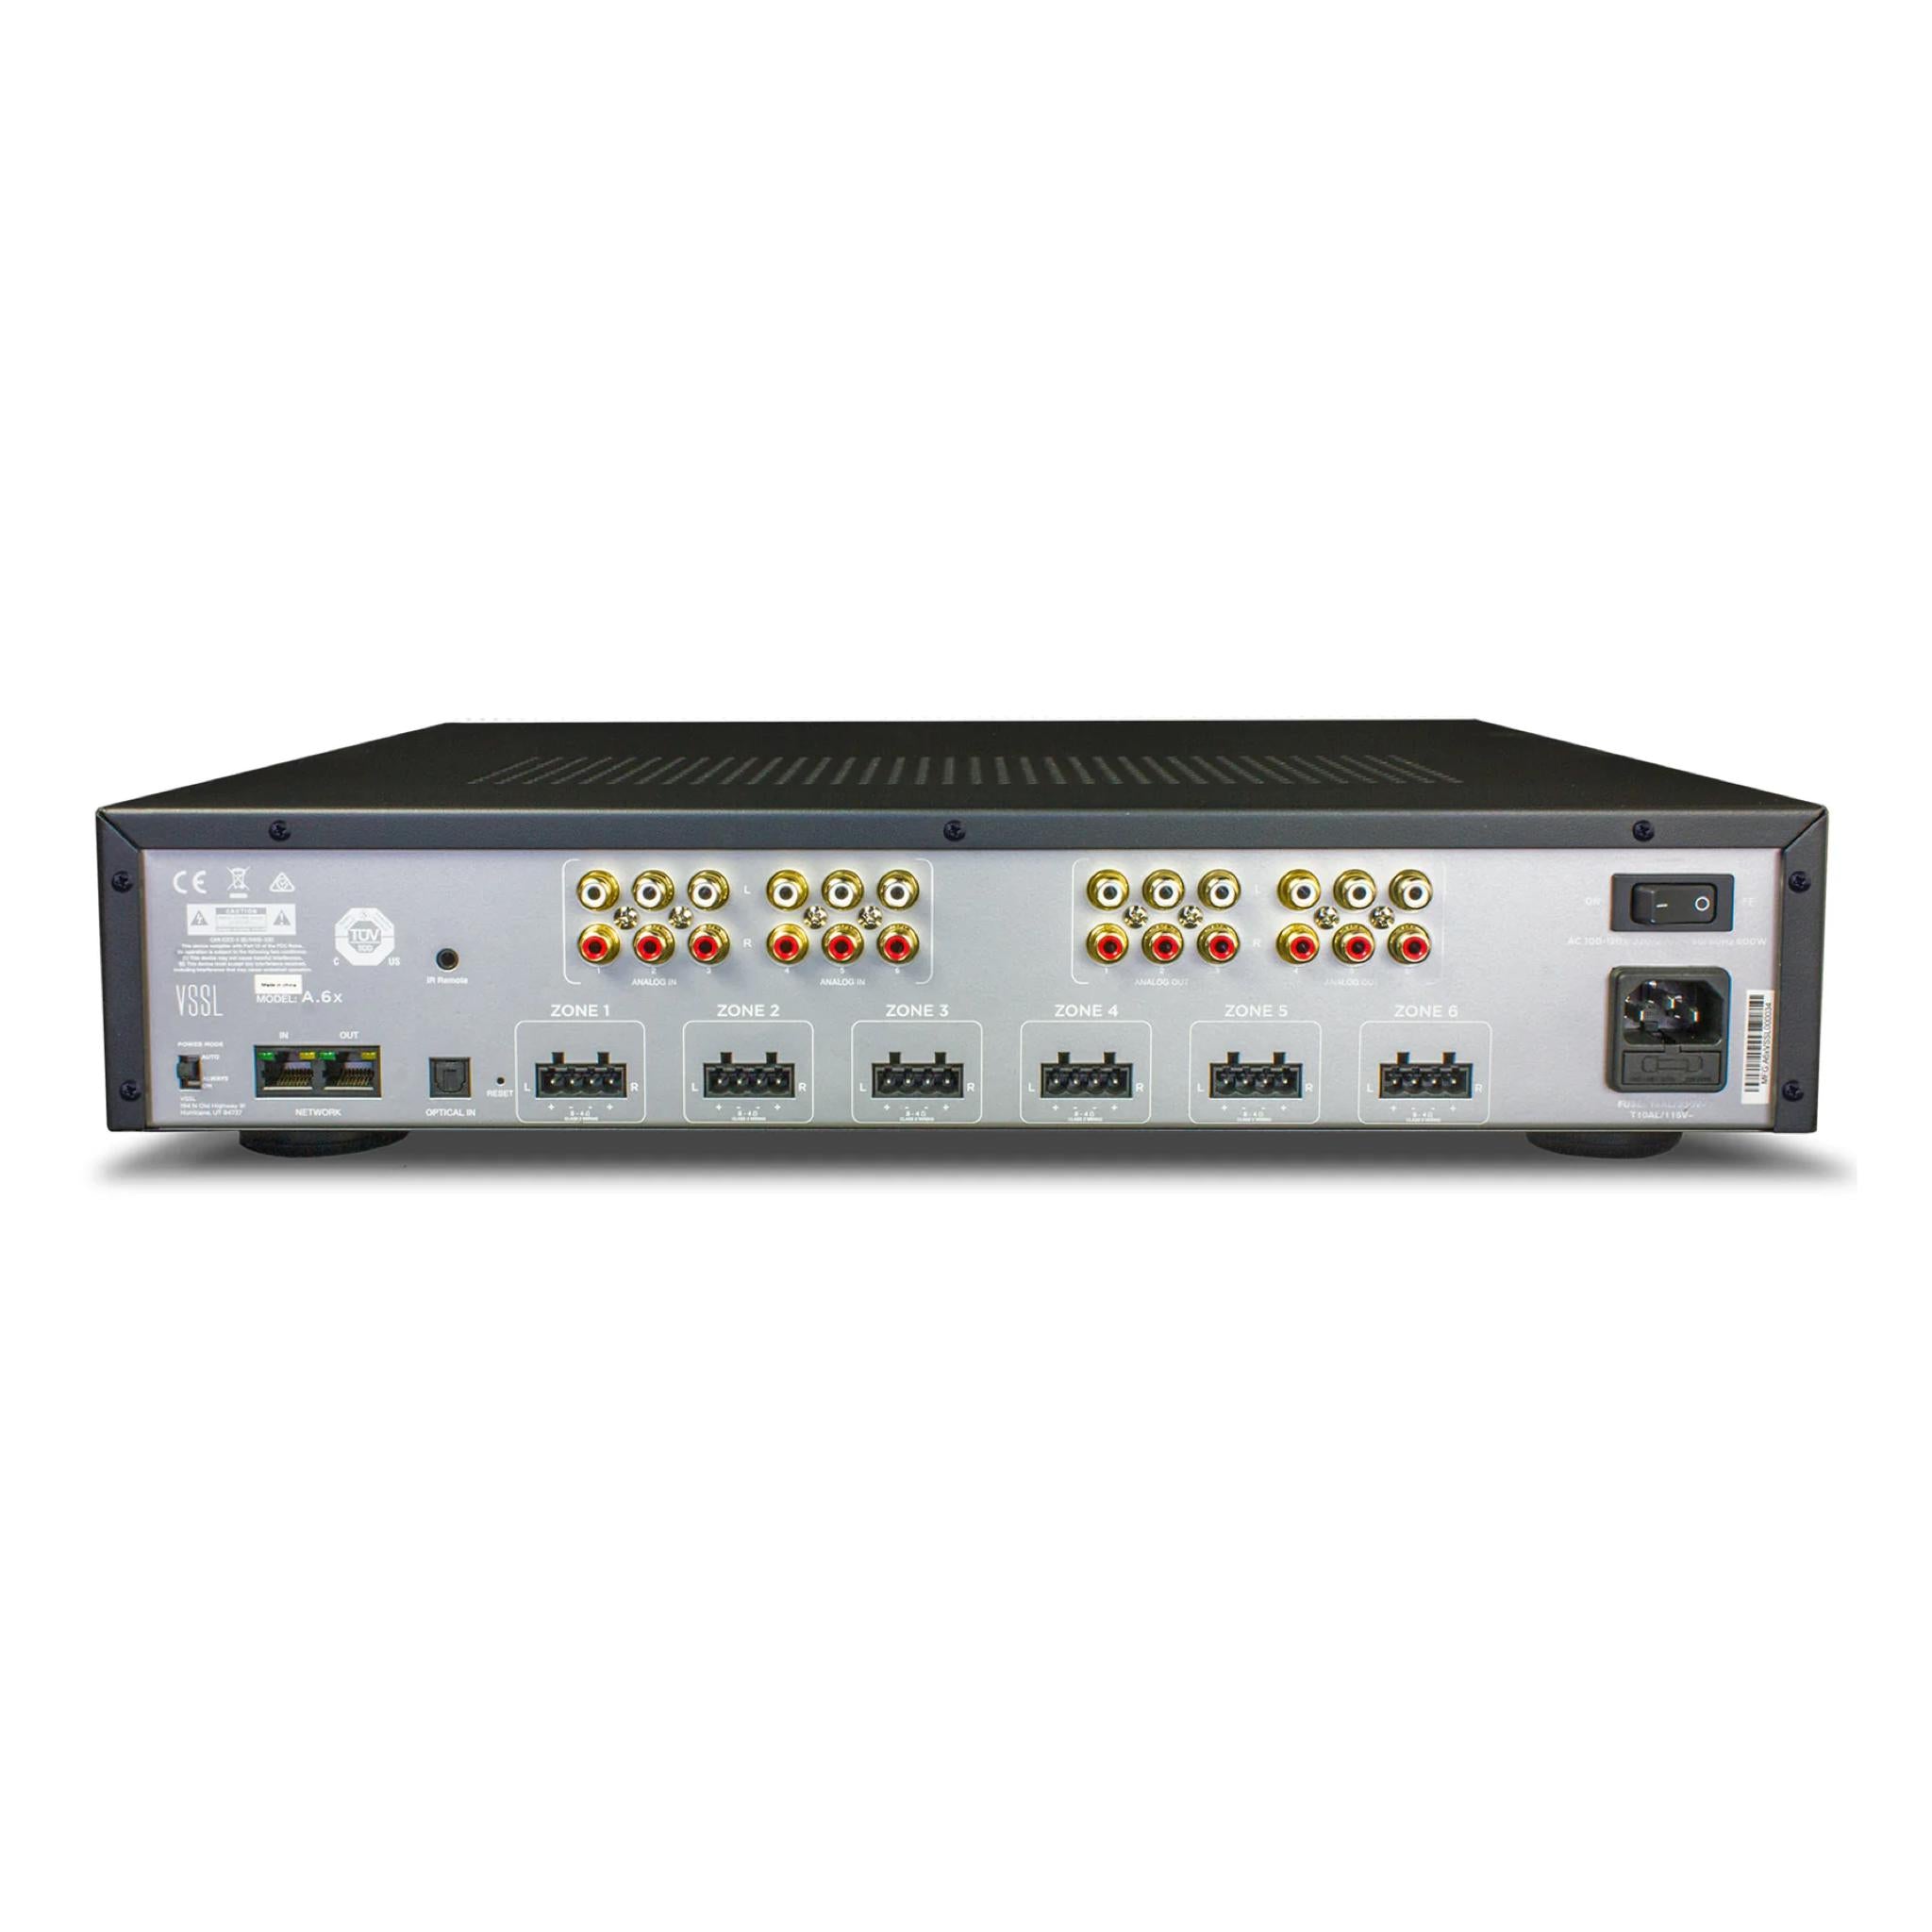 VSSL A.6x - Amplifier with Multi-Zone Functionality, VSSL, Integrated Amplifier - AVStore.in